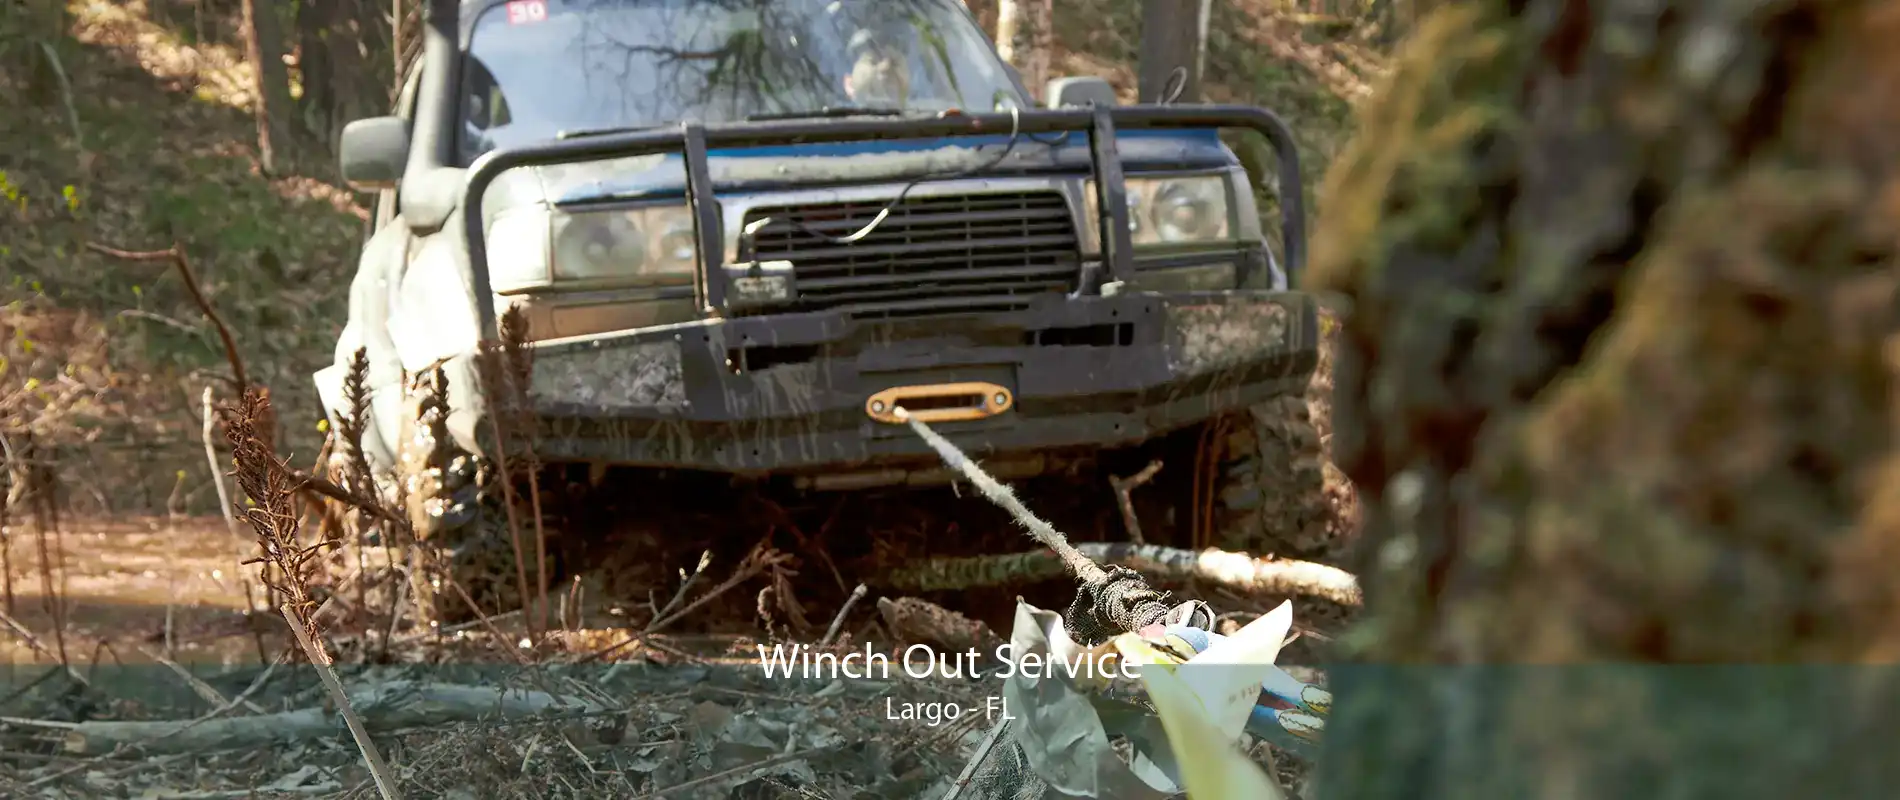 Winch Out Service Largo - FL